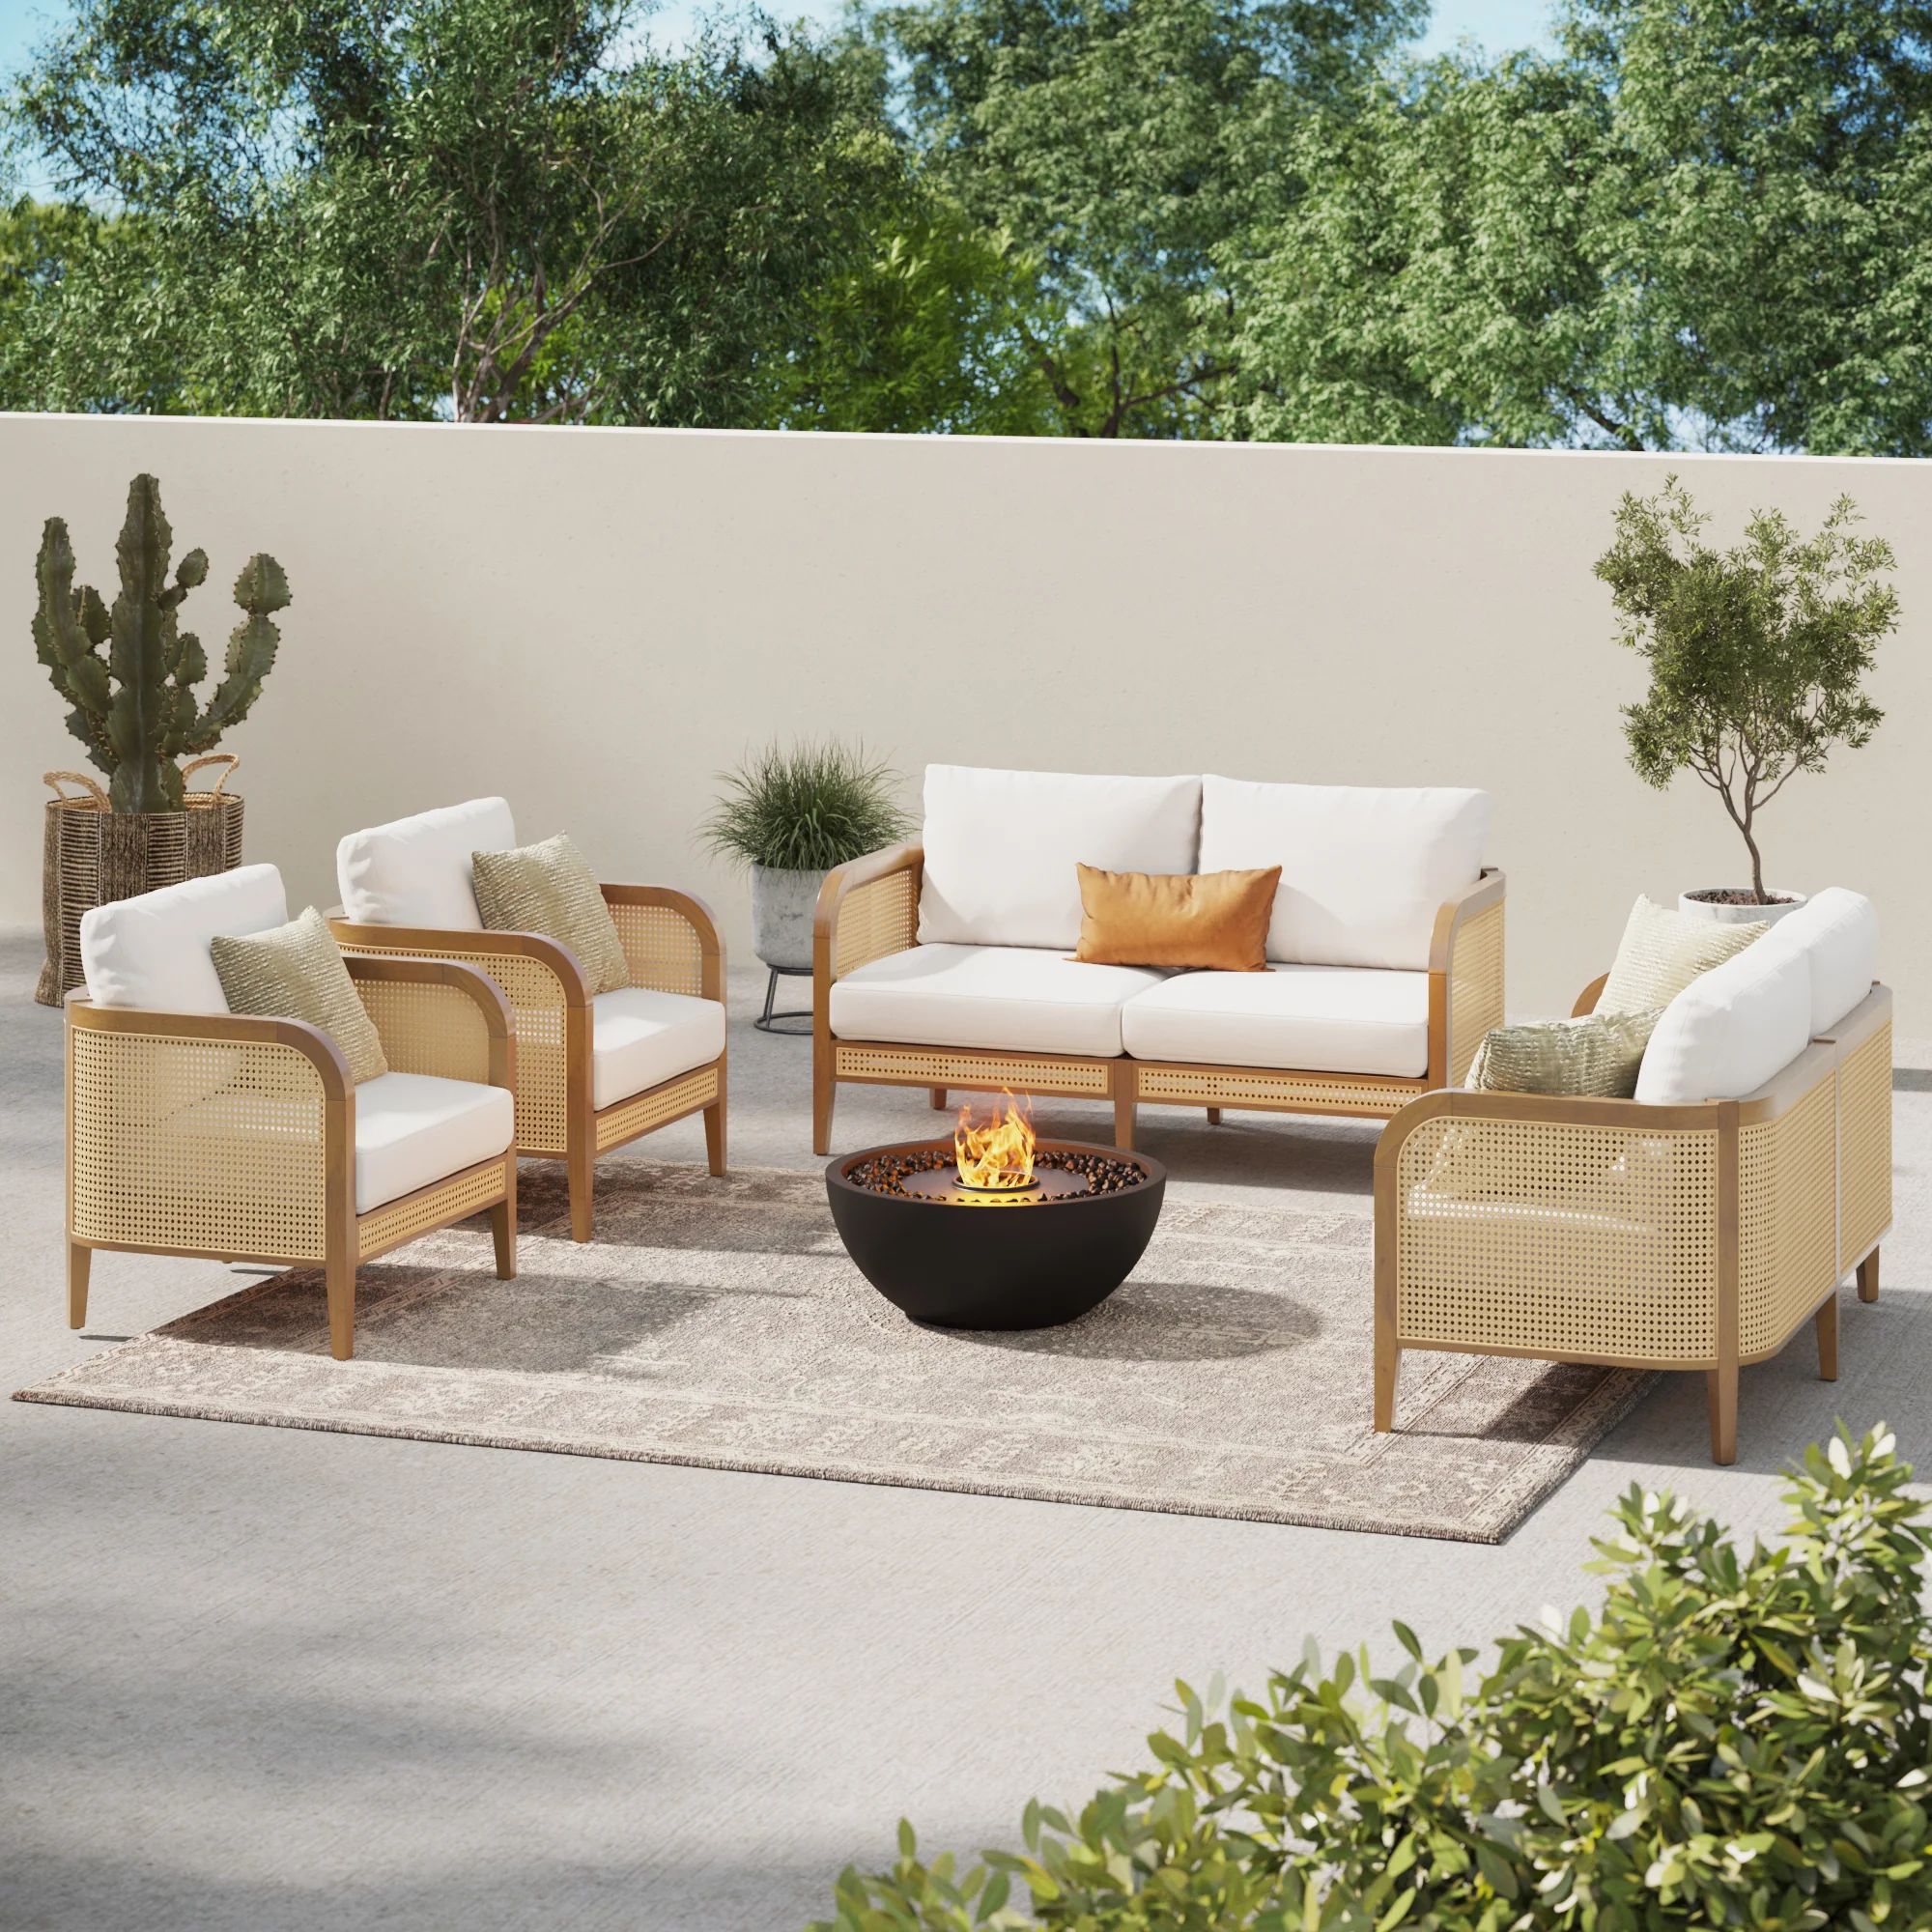 Set of 2 Rattan Outdoor Loveseats & 2 Chairs | Nathan James